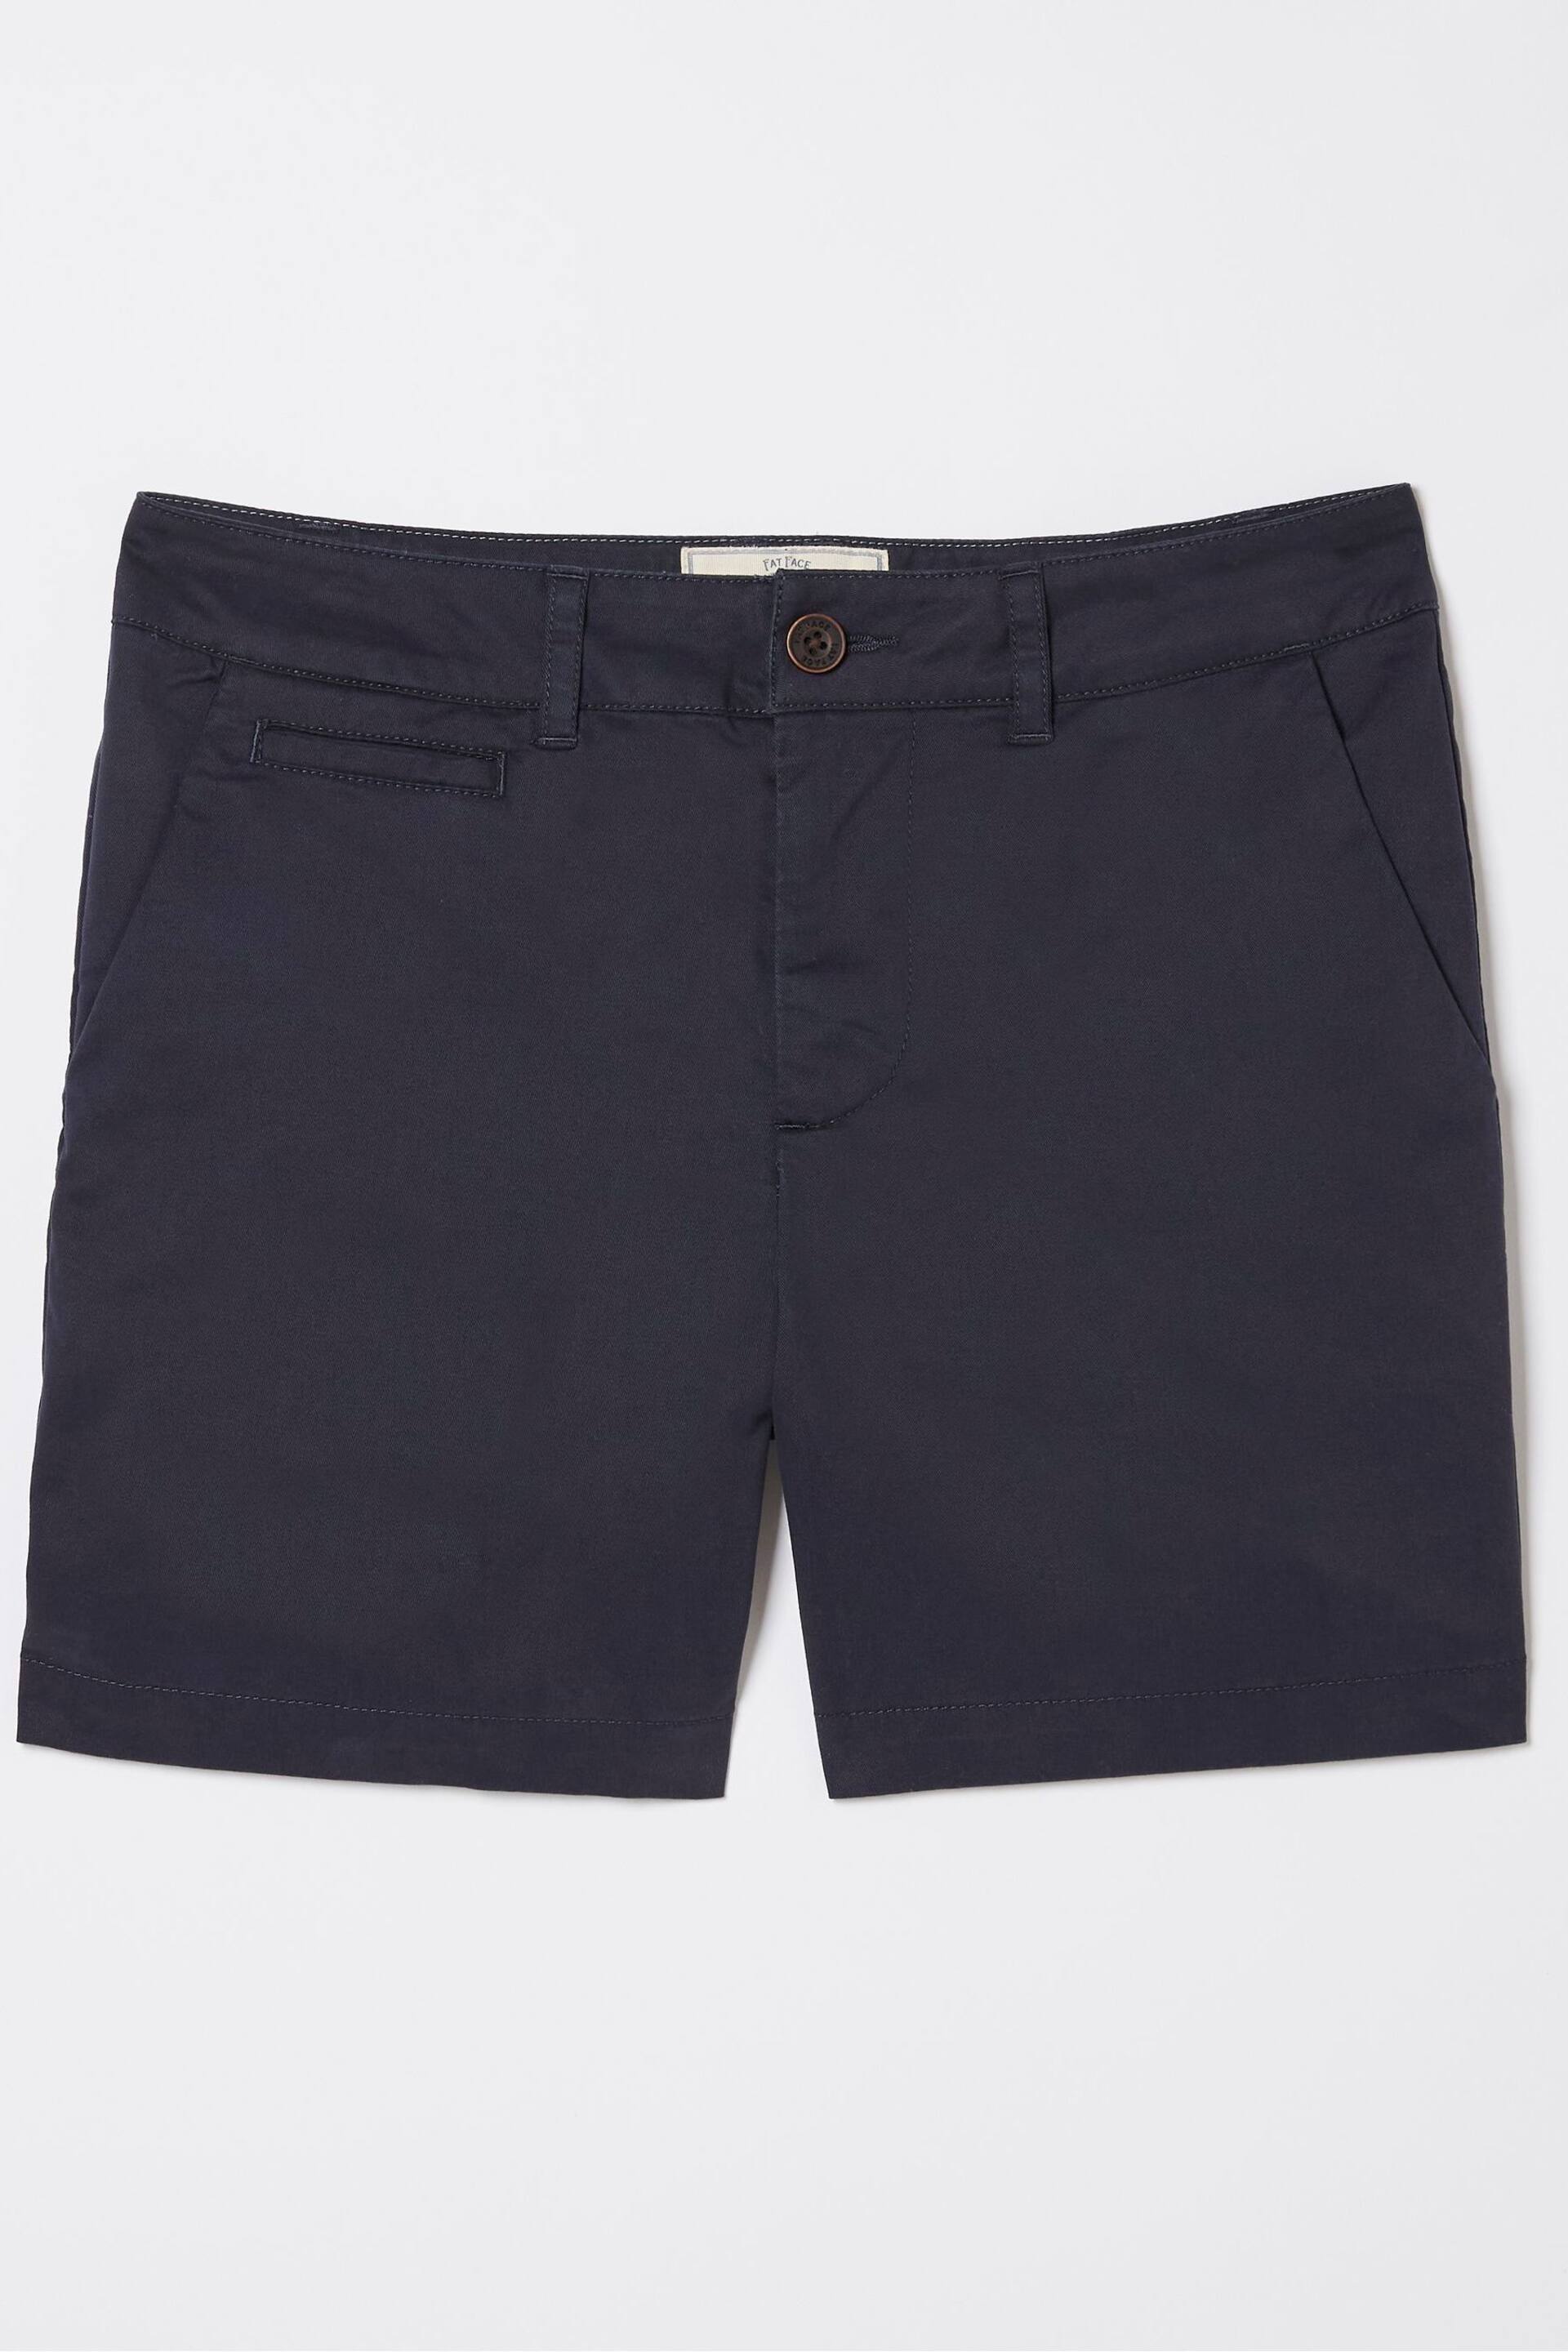 FatFace Blue Padstow Chinos Shorts - Image 4 of 4